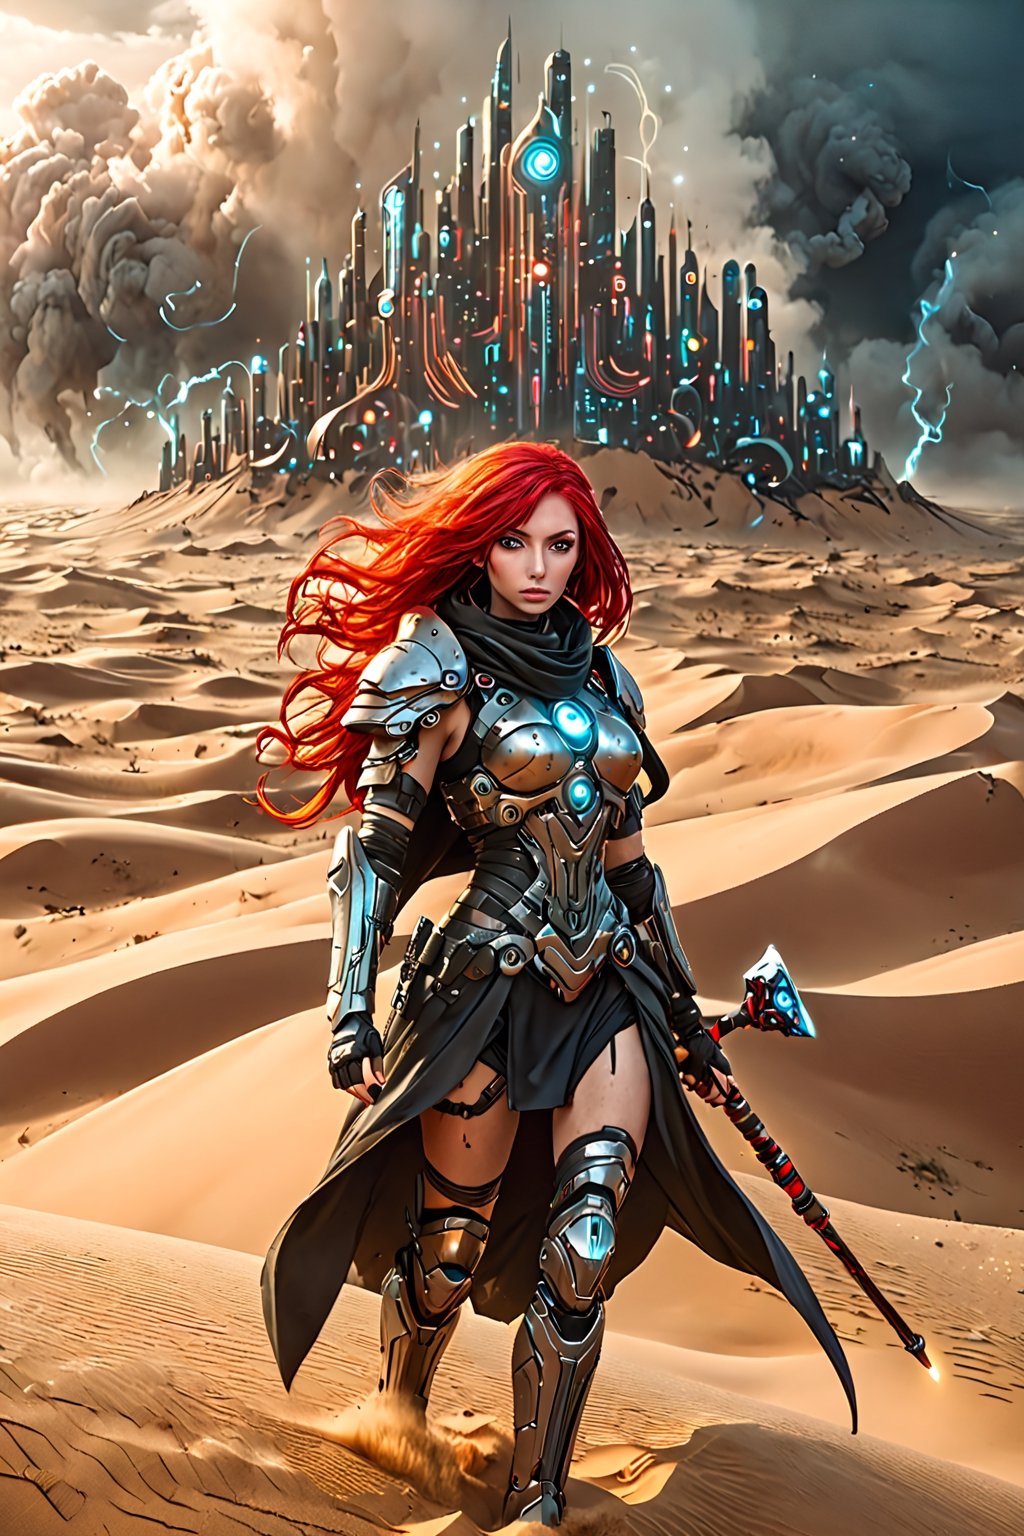 Surrealist anime art style, a lone red hair female warrior with magical staff wearing cape in apocalyptic sand dunes, ((cyber city above the sand dunes)), dark swirling sandstorm approaching, more detail XL,style, closeup shot,